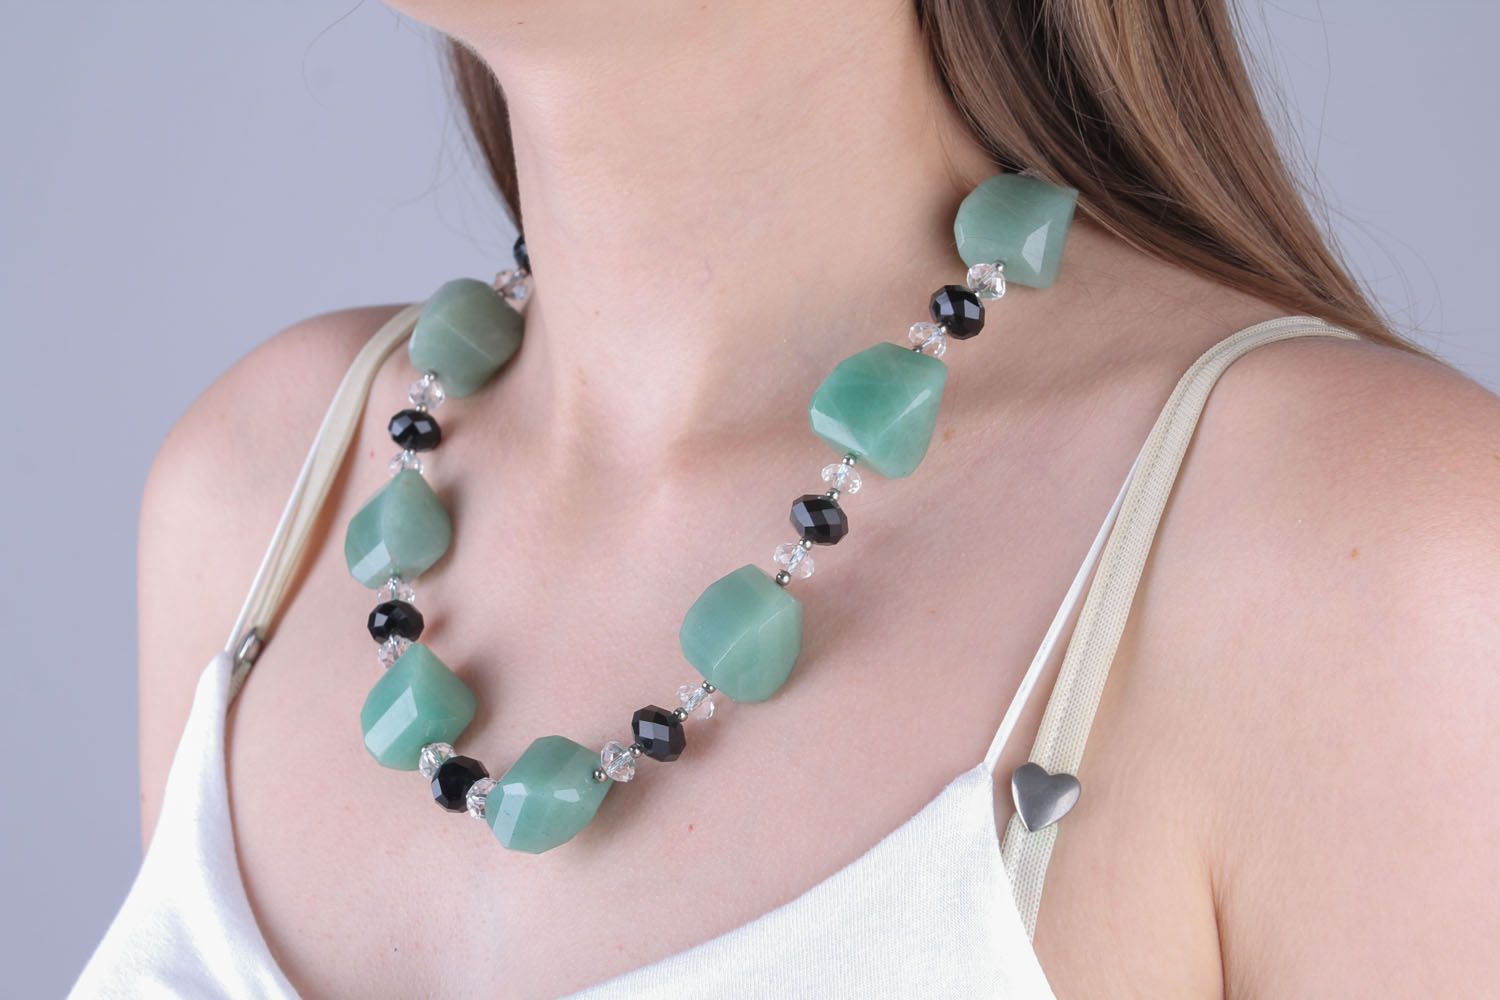 Necklace made of natural stones photo 4